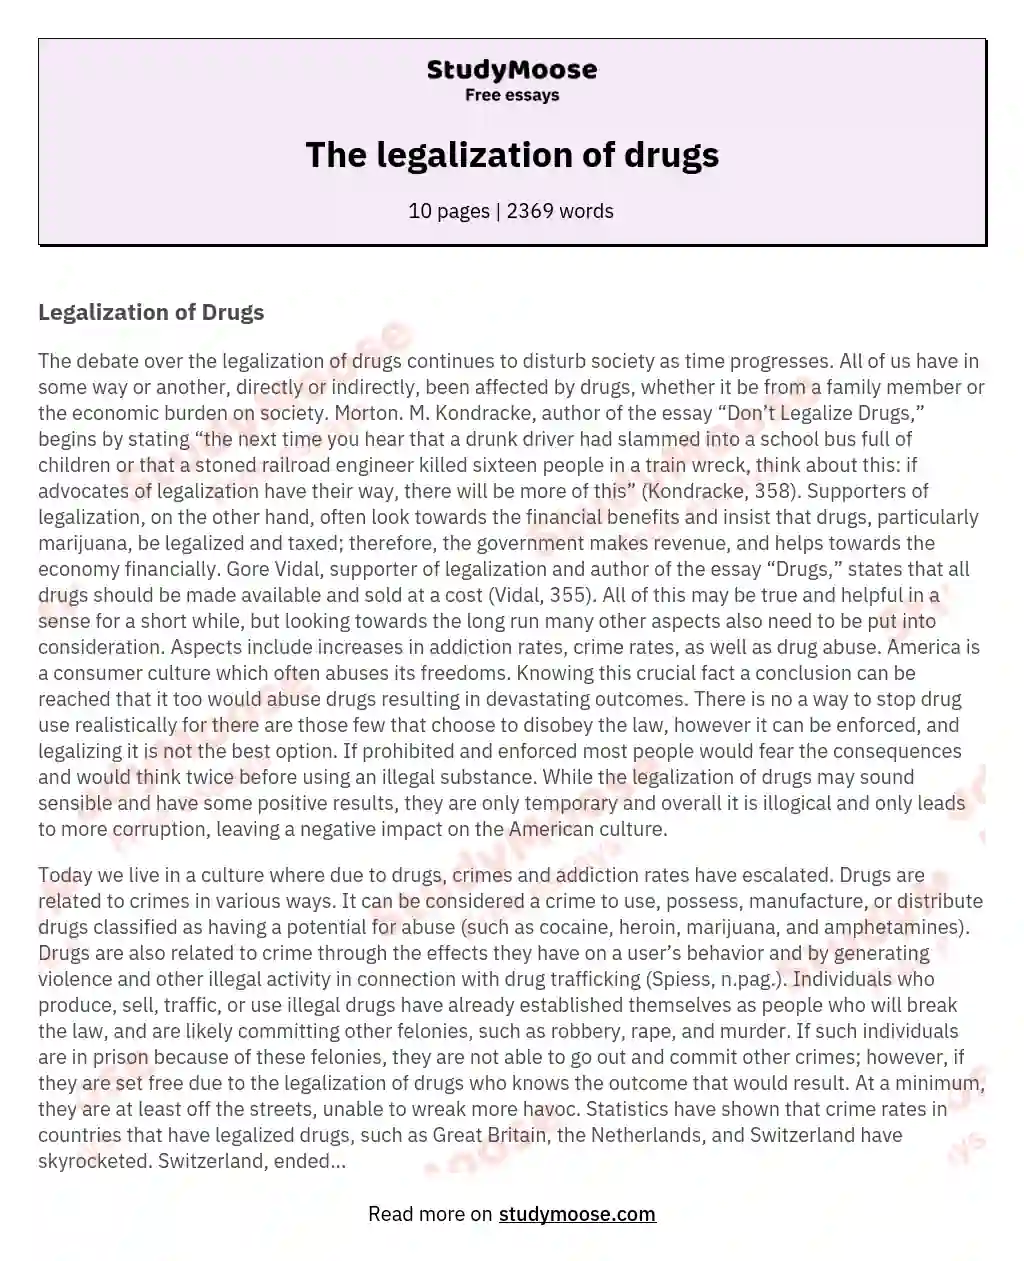 The legalization of drugs